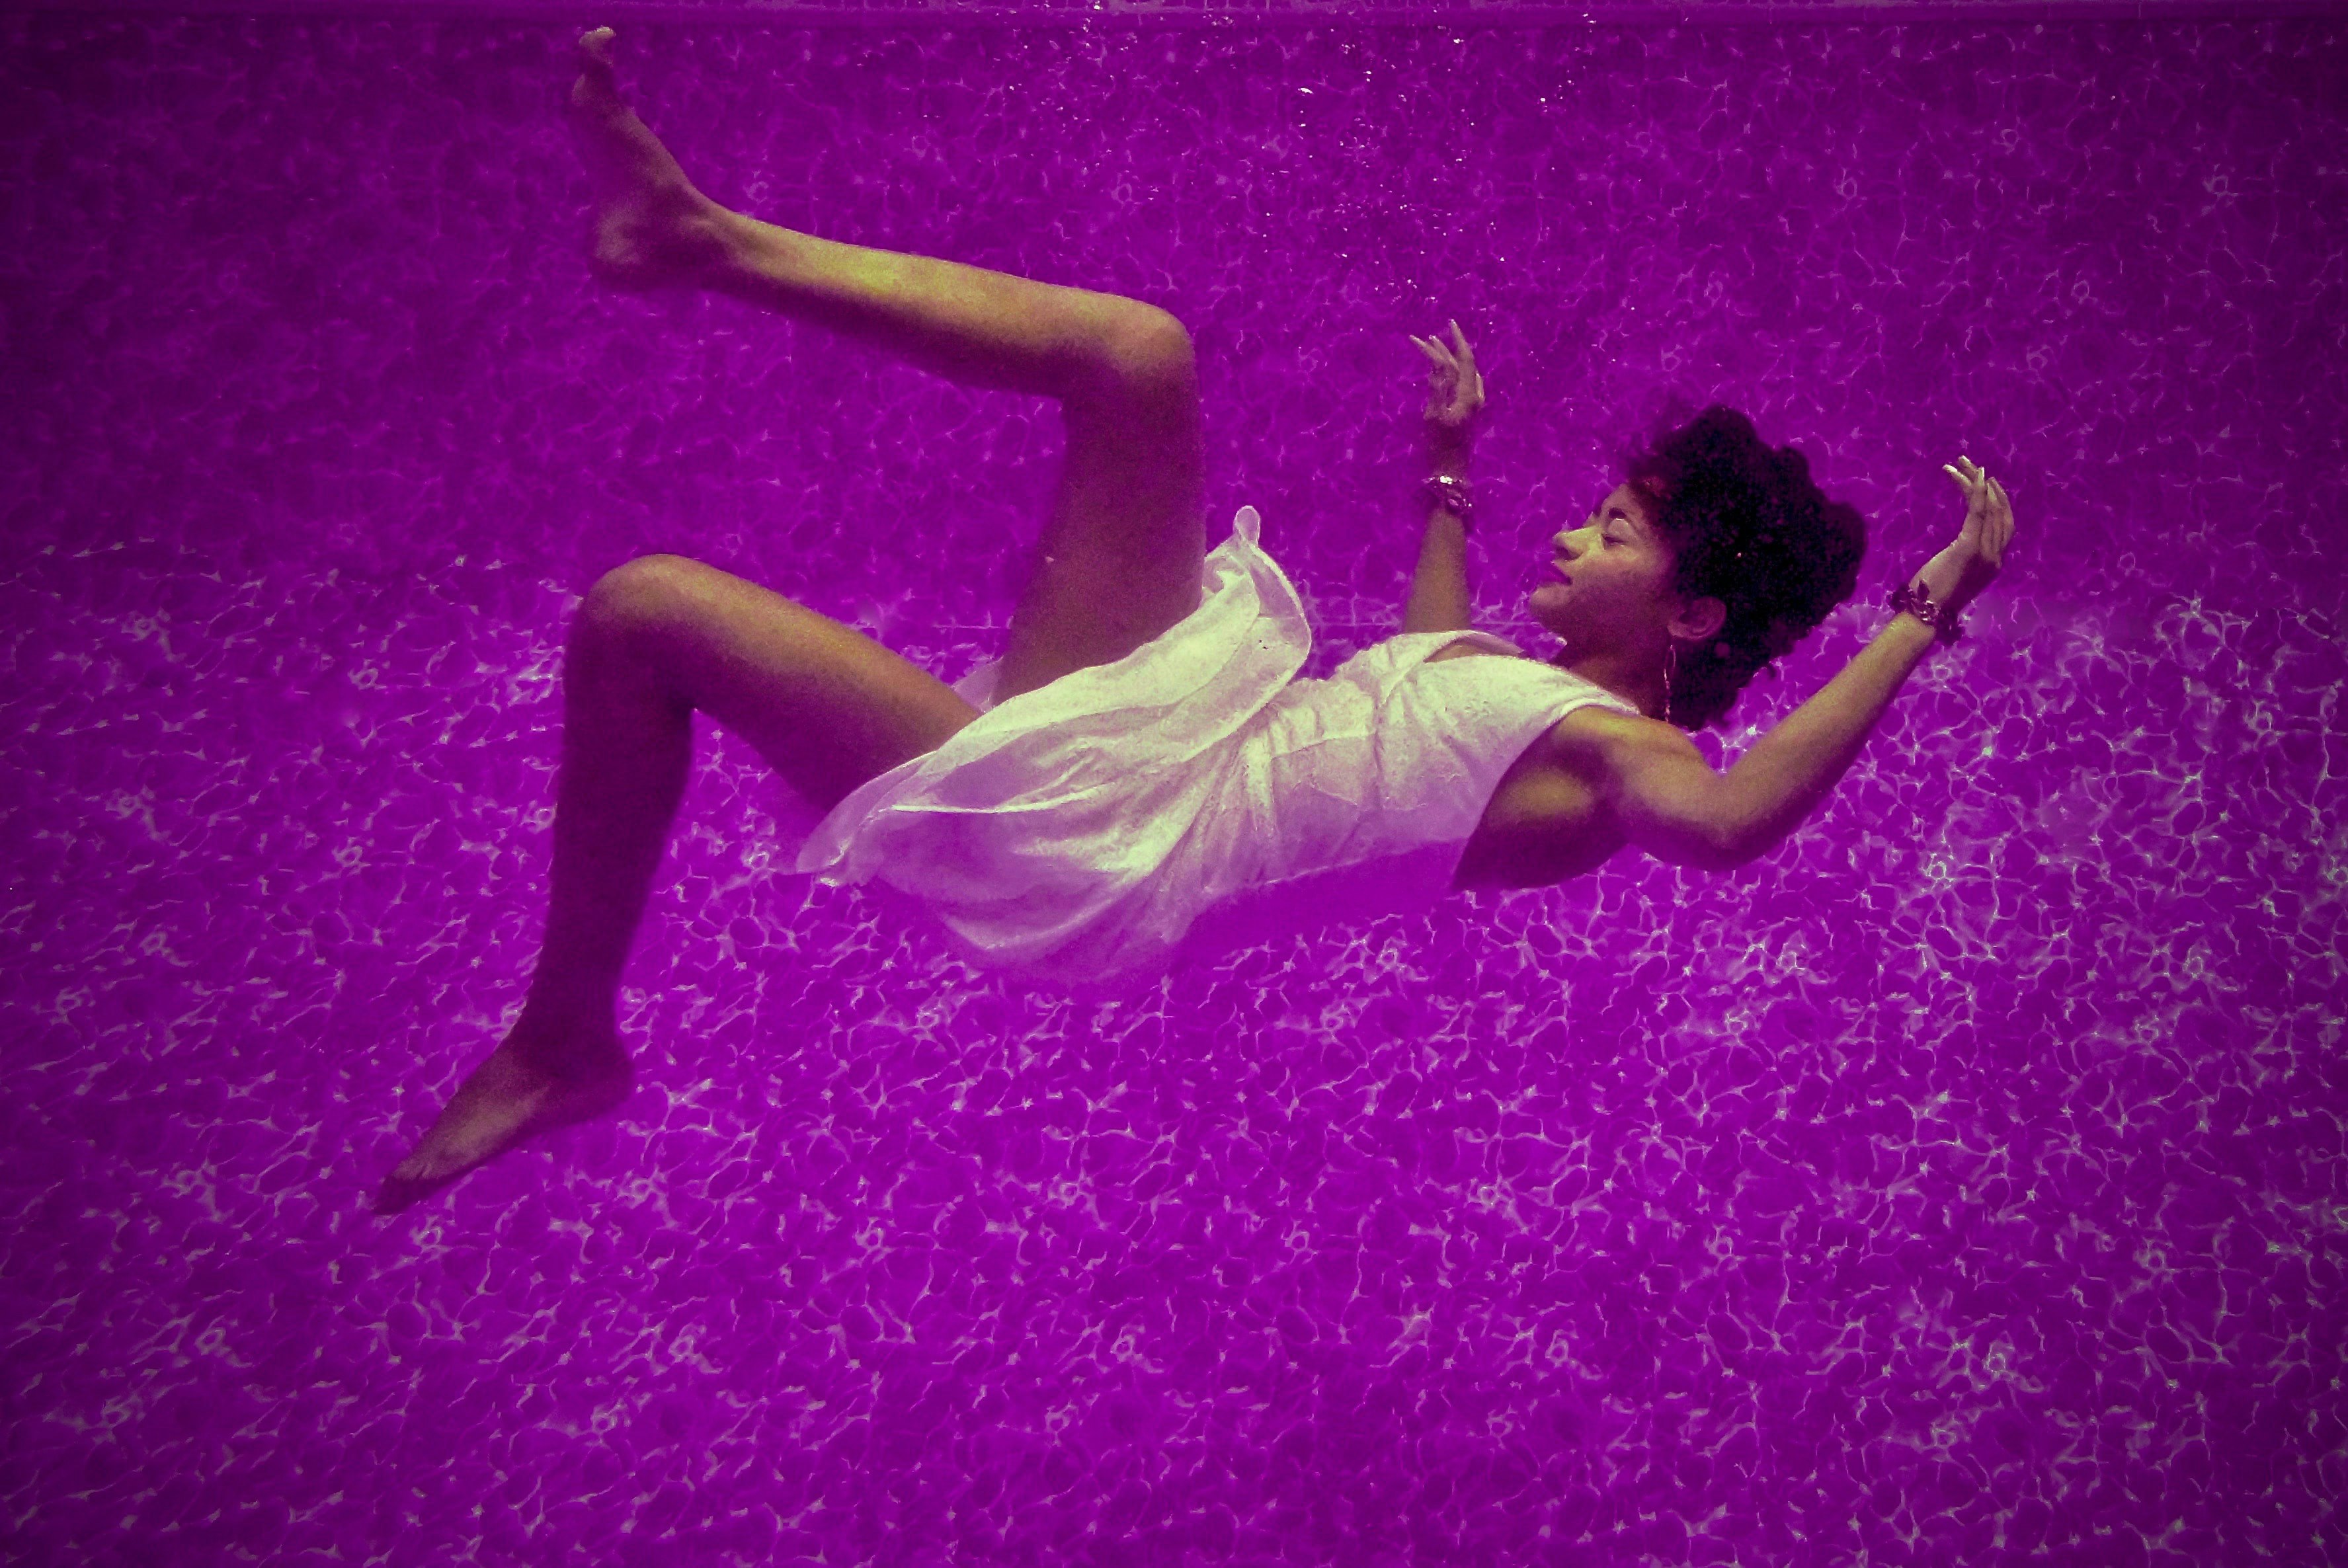 a woman wearing a white dress who looks to be dreaming, against a purple background